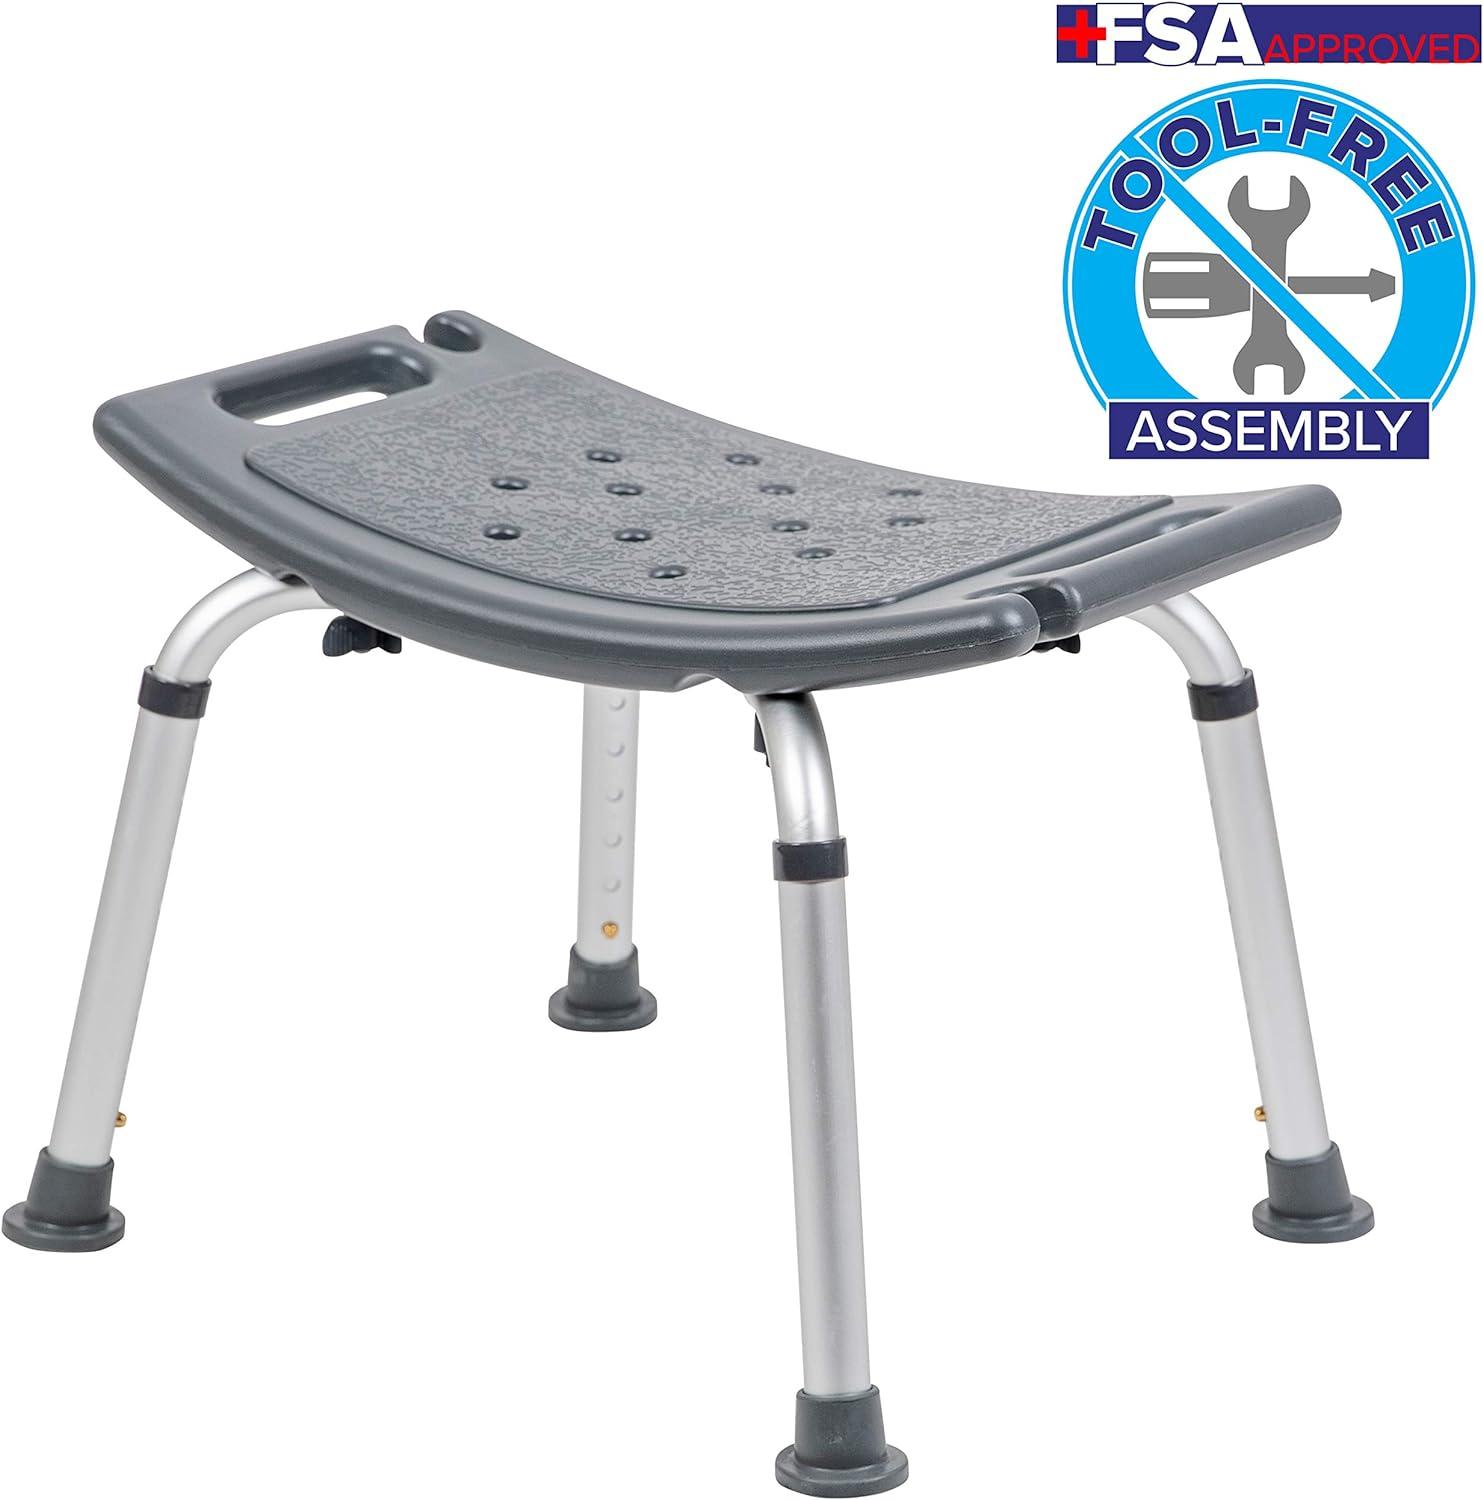 Adjustable Gray Bath & Shower Chair with Non-Slip, Tool-Free Assembly